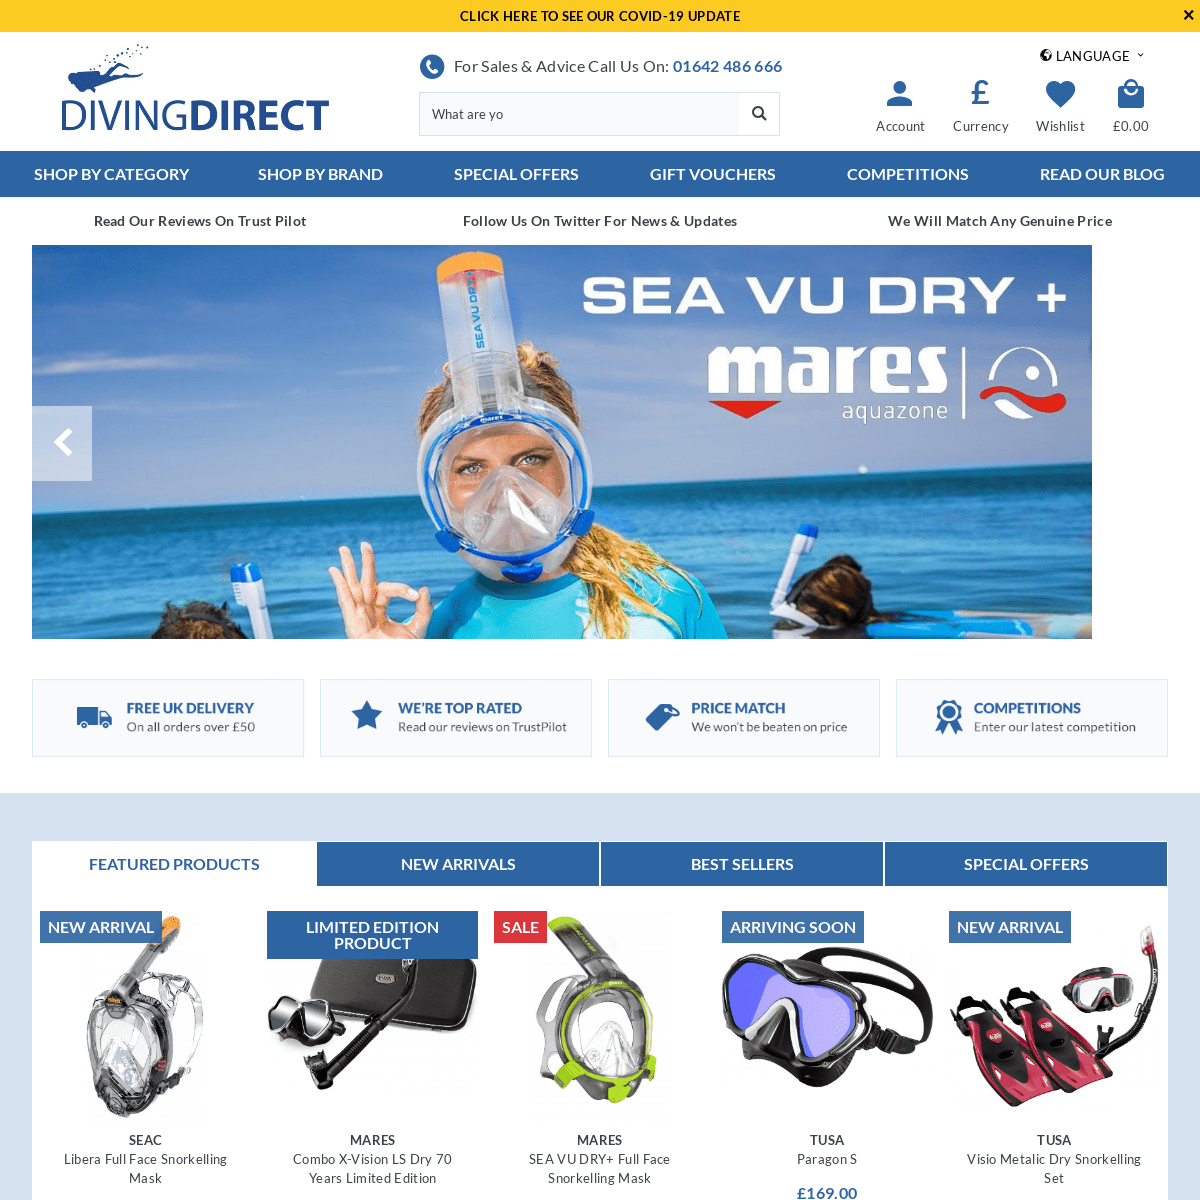 A complete backup of divingdirect.co.uk